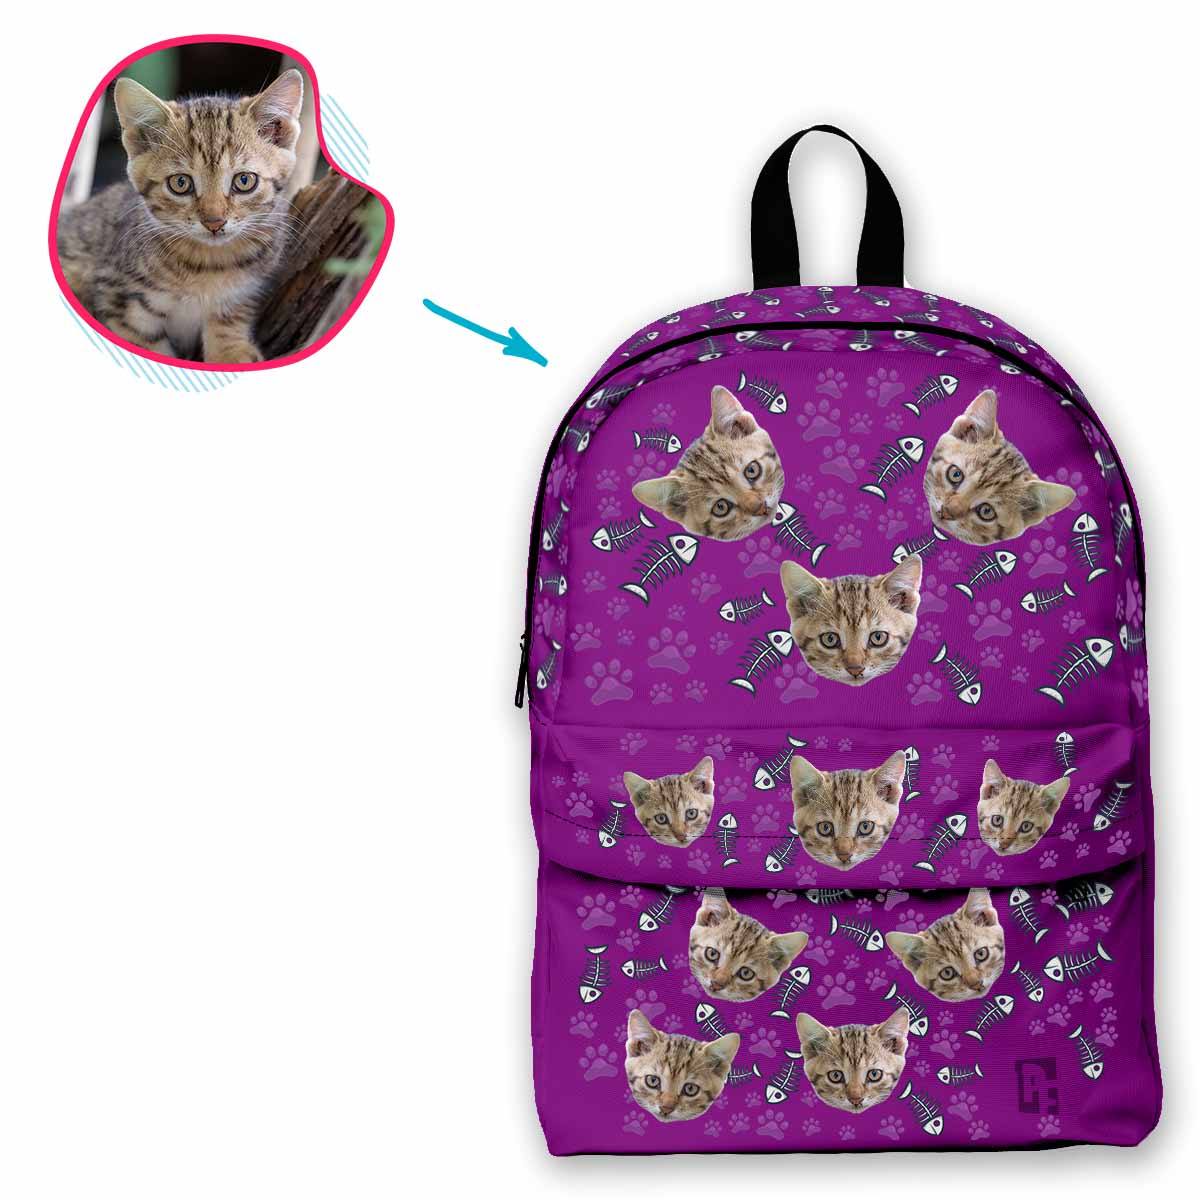 purple Cat classic backpack personalized with photo of face printed on it